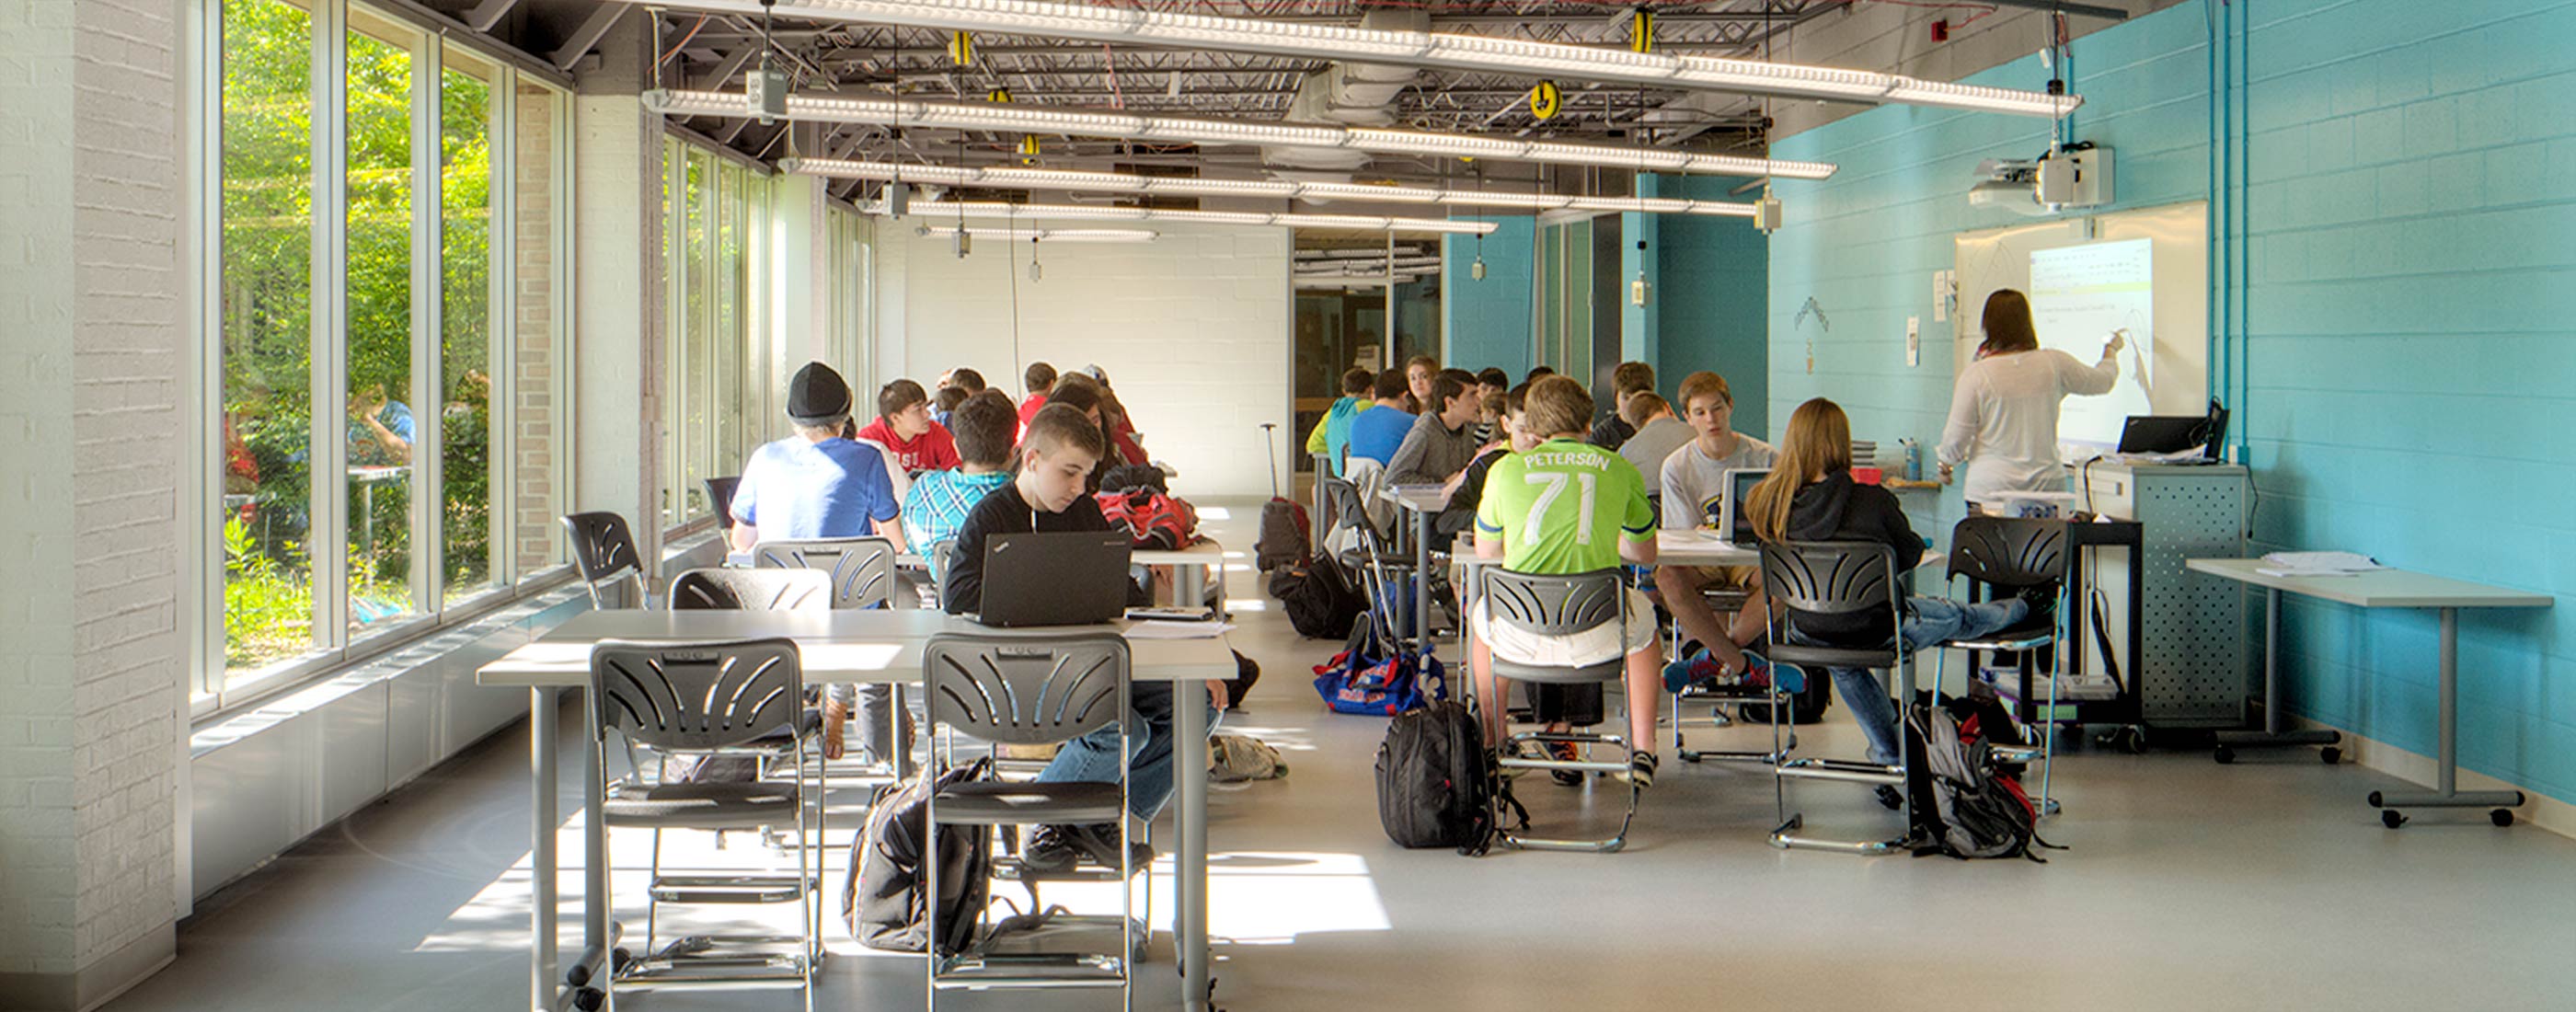 Students at Marysville STEM Early College High School benefit from natural daylight for transparency and connectivity.